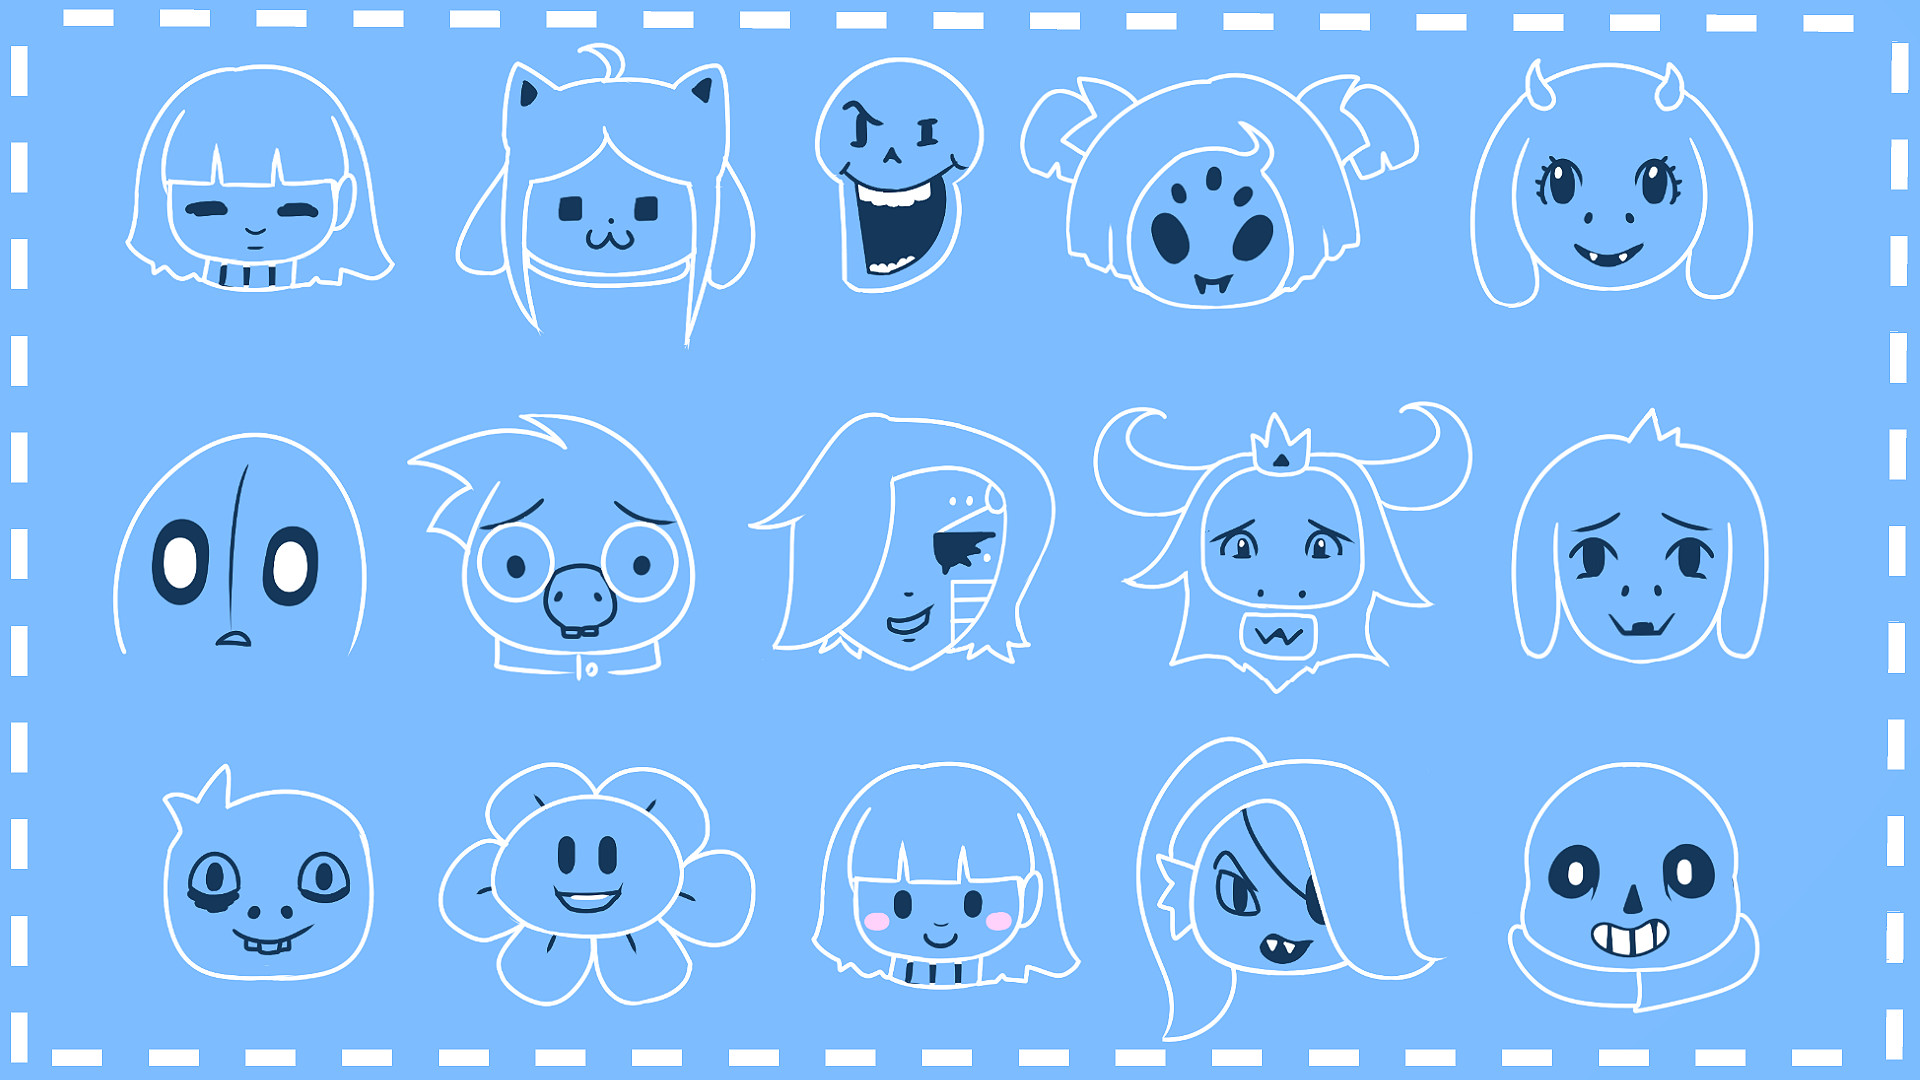 High Quality Undertale Images Collection for Desktop